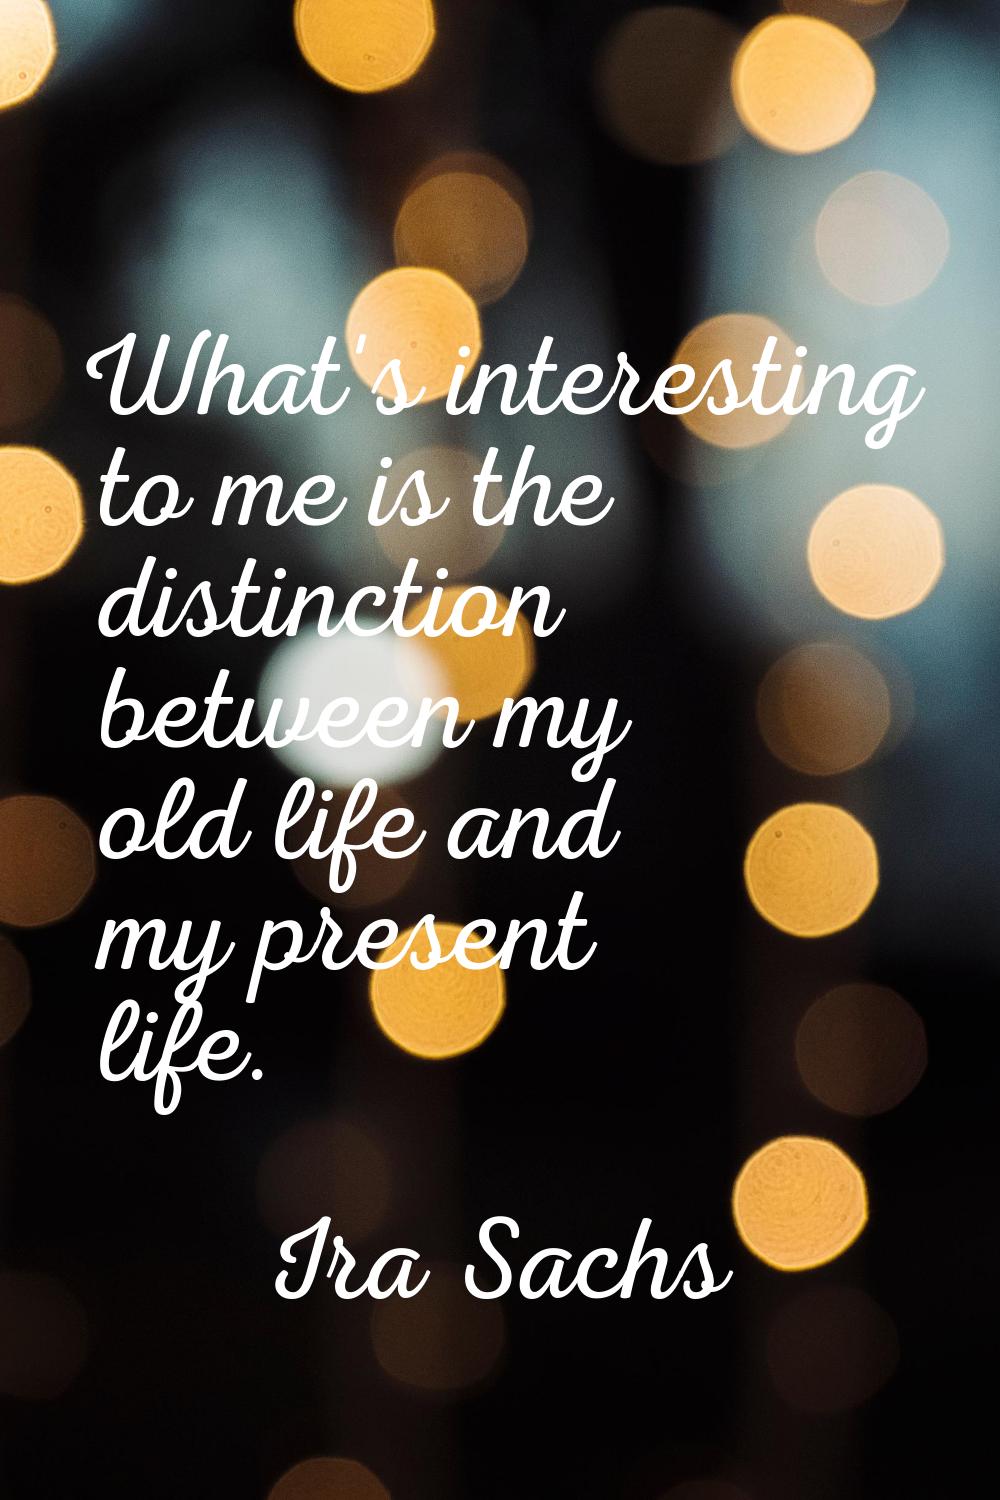 What's interesting to me is the distinction between my old life and my present life.